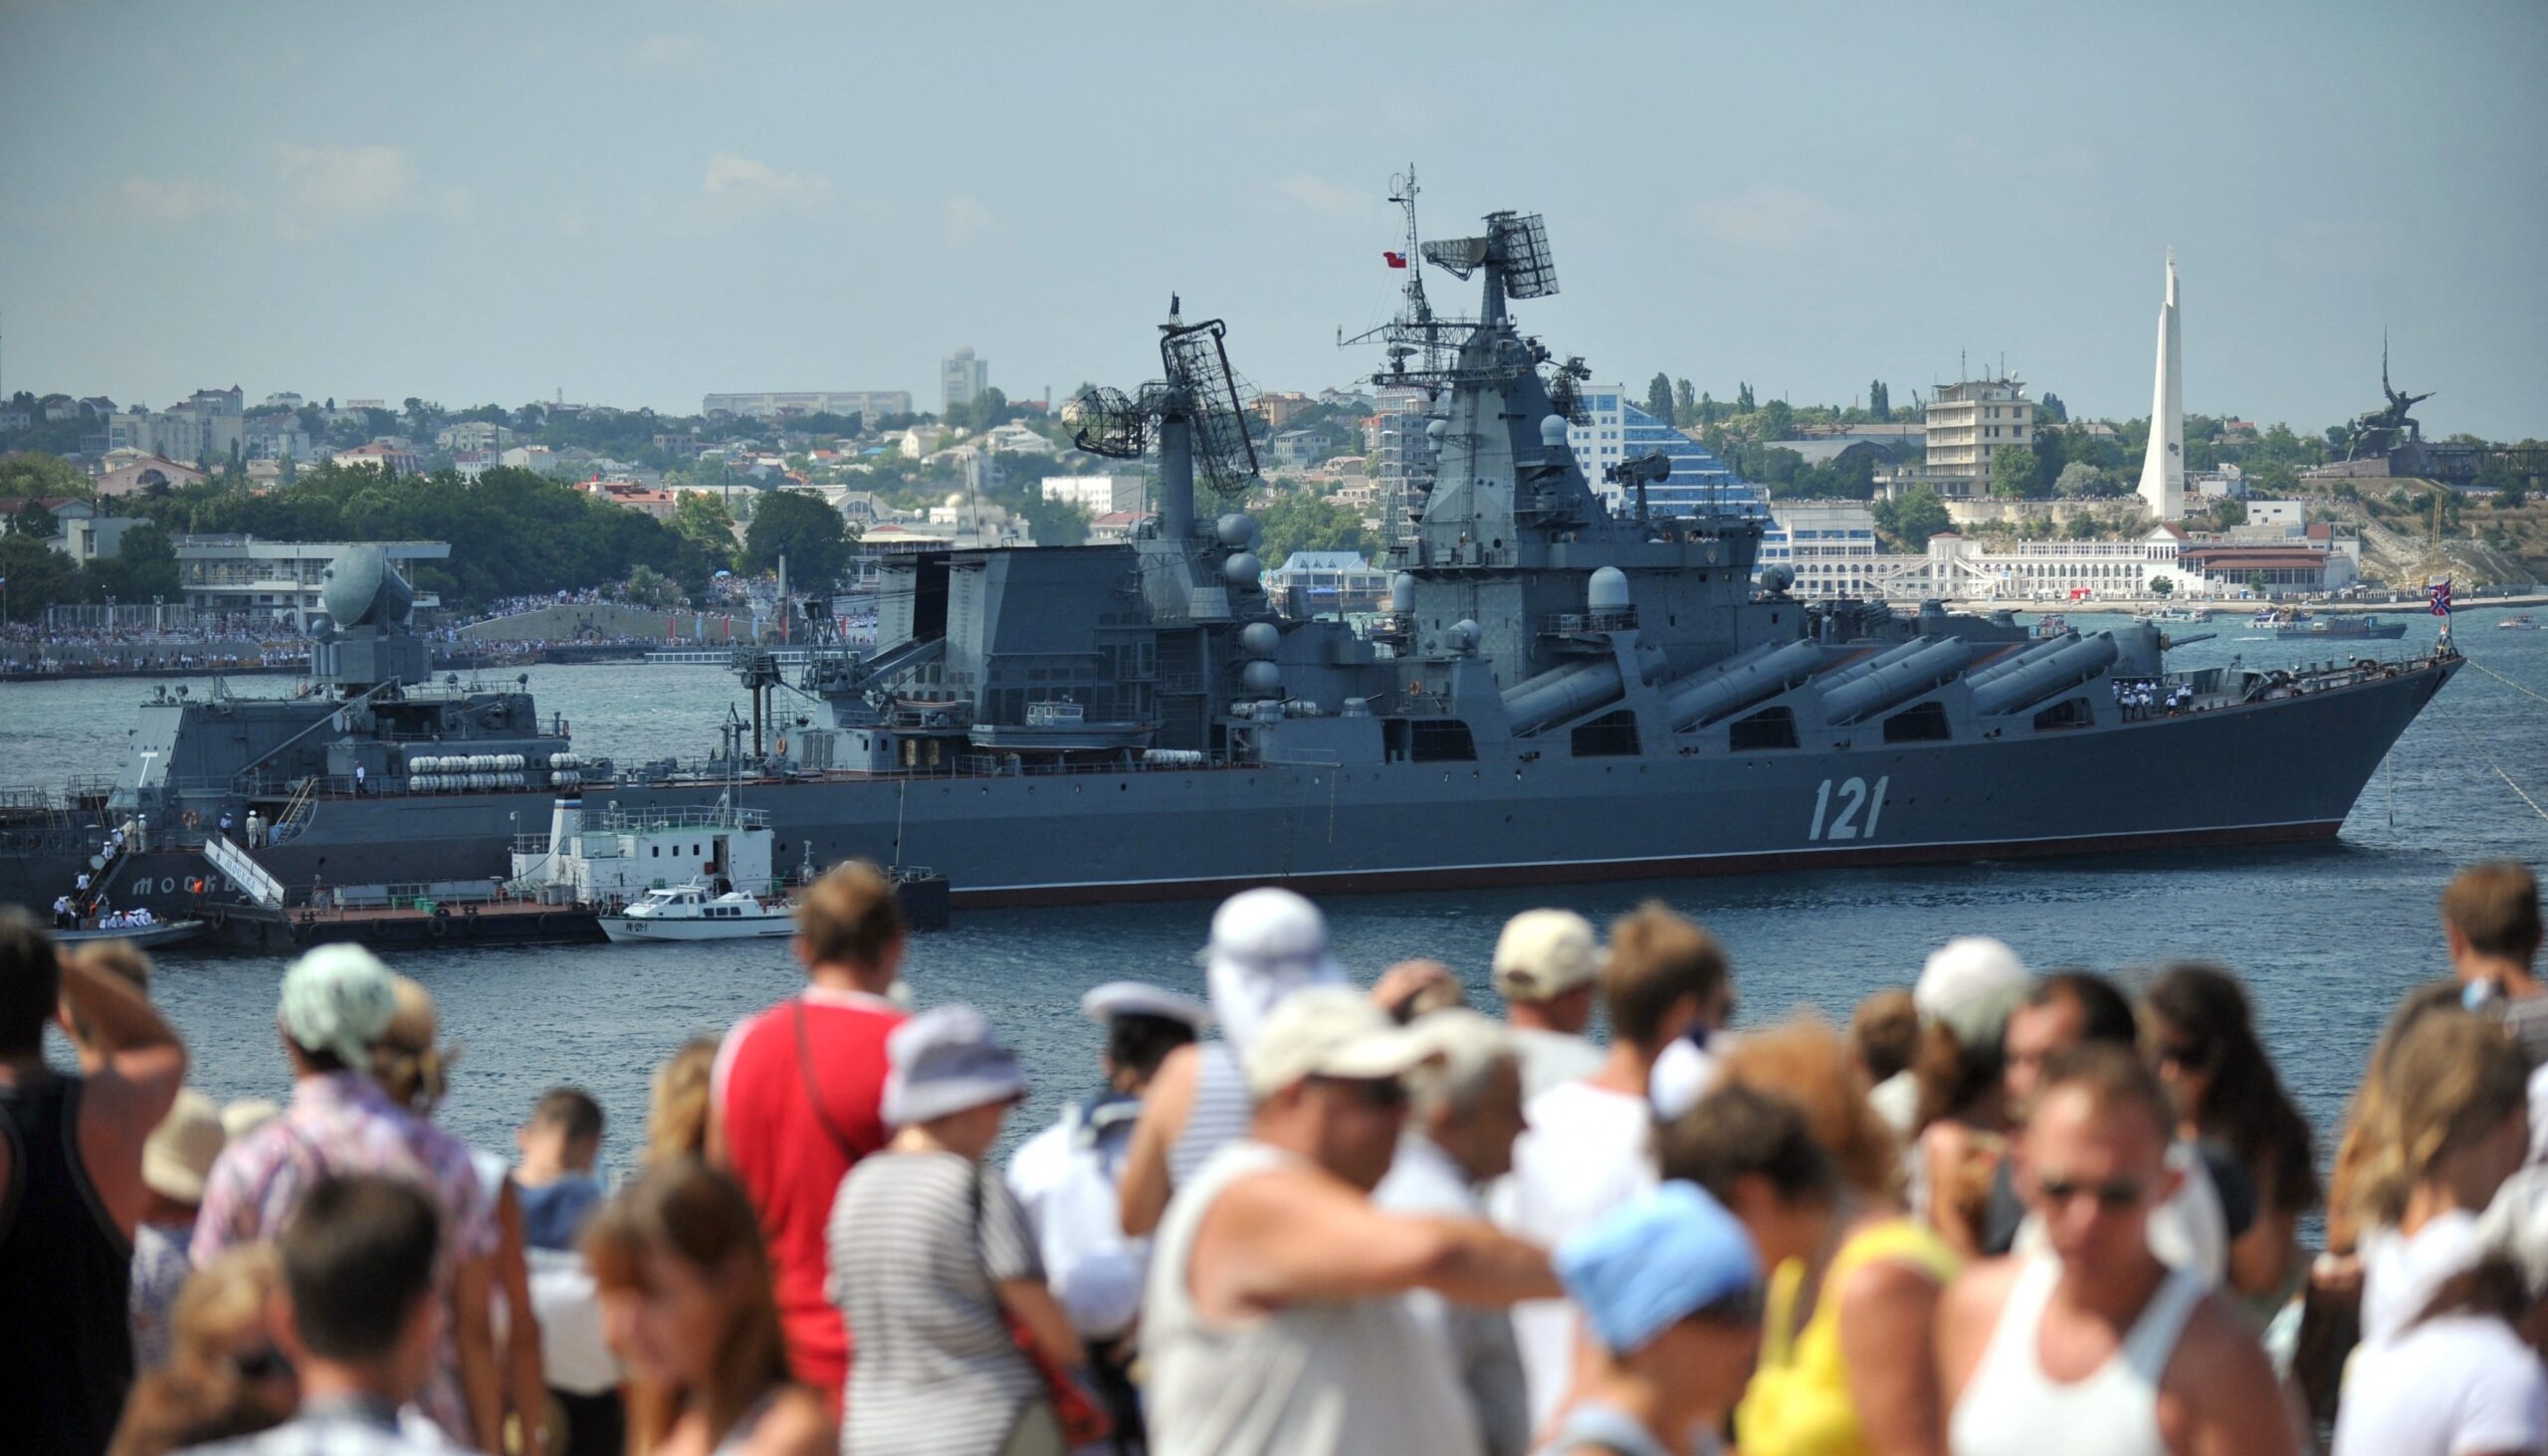 the Moskva guided missile cruiser behind a crowd of people